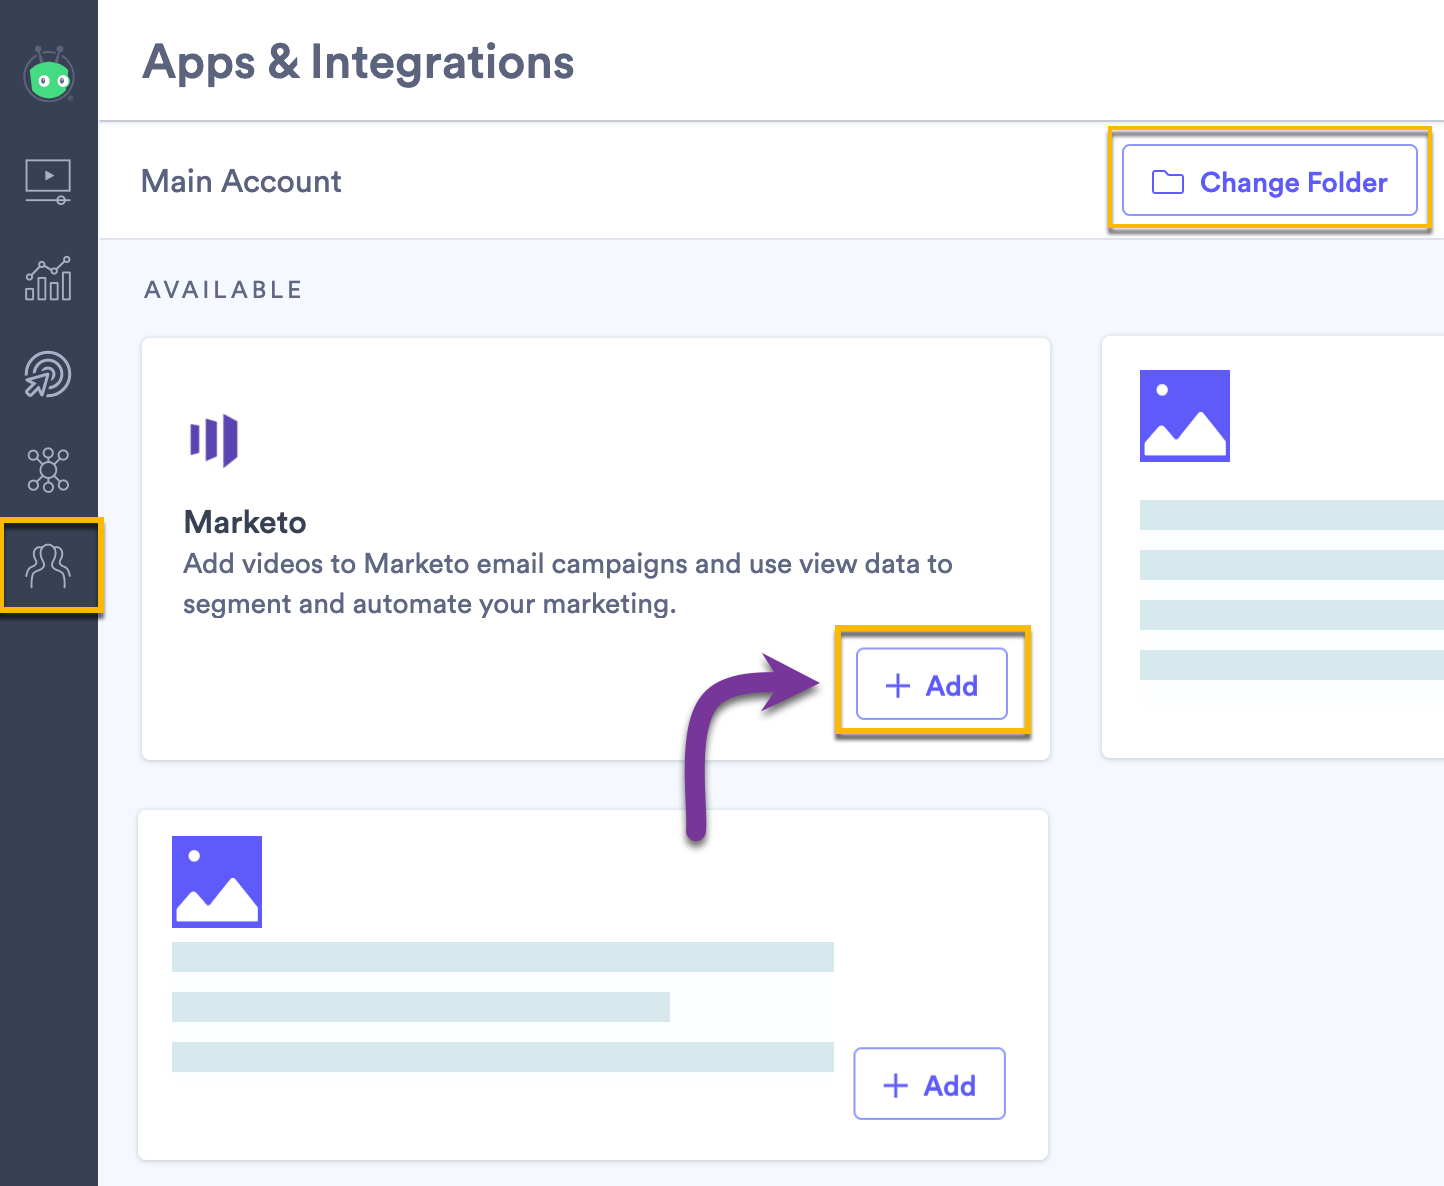 Connecting Vidyard and Marketo within the integrations menu in Vidyard